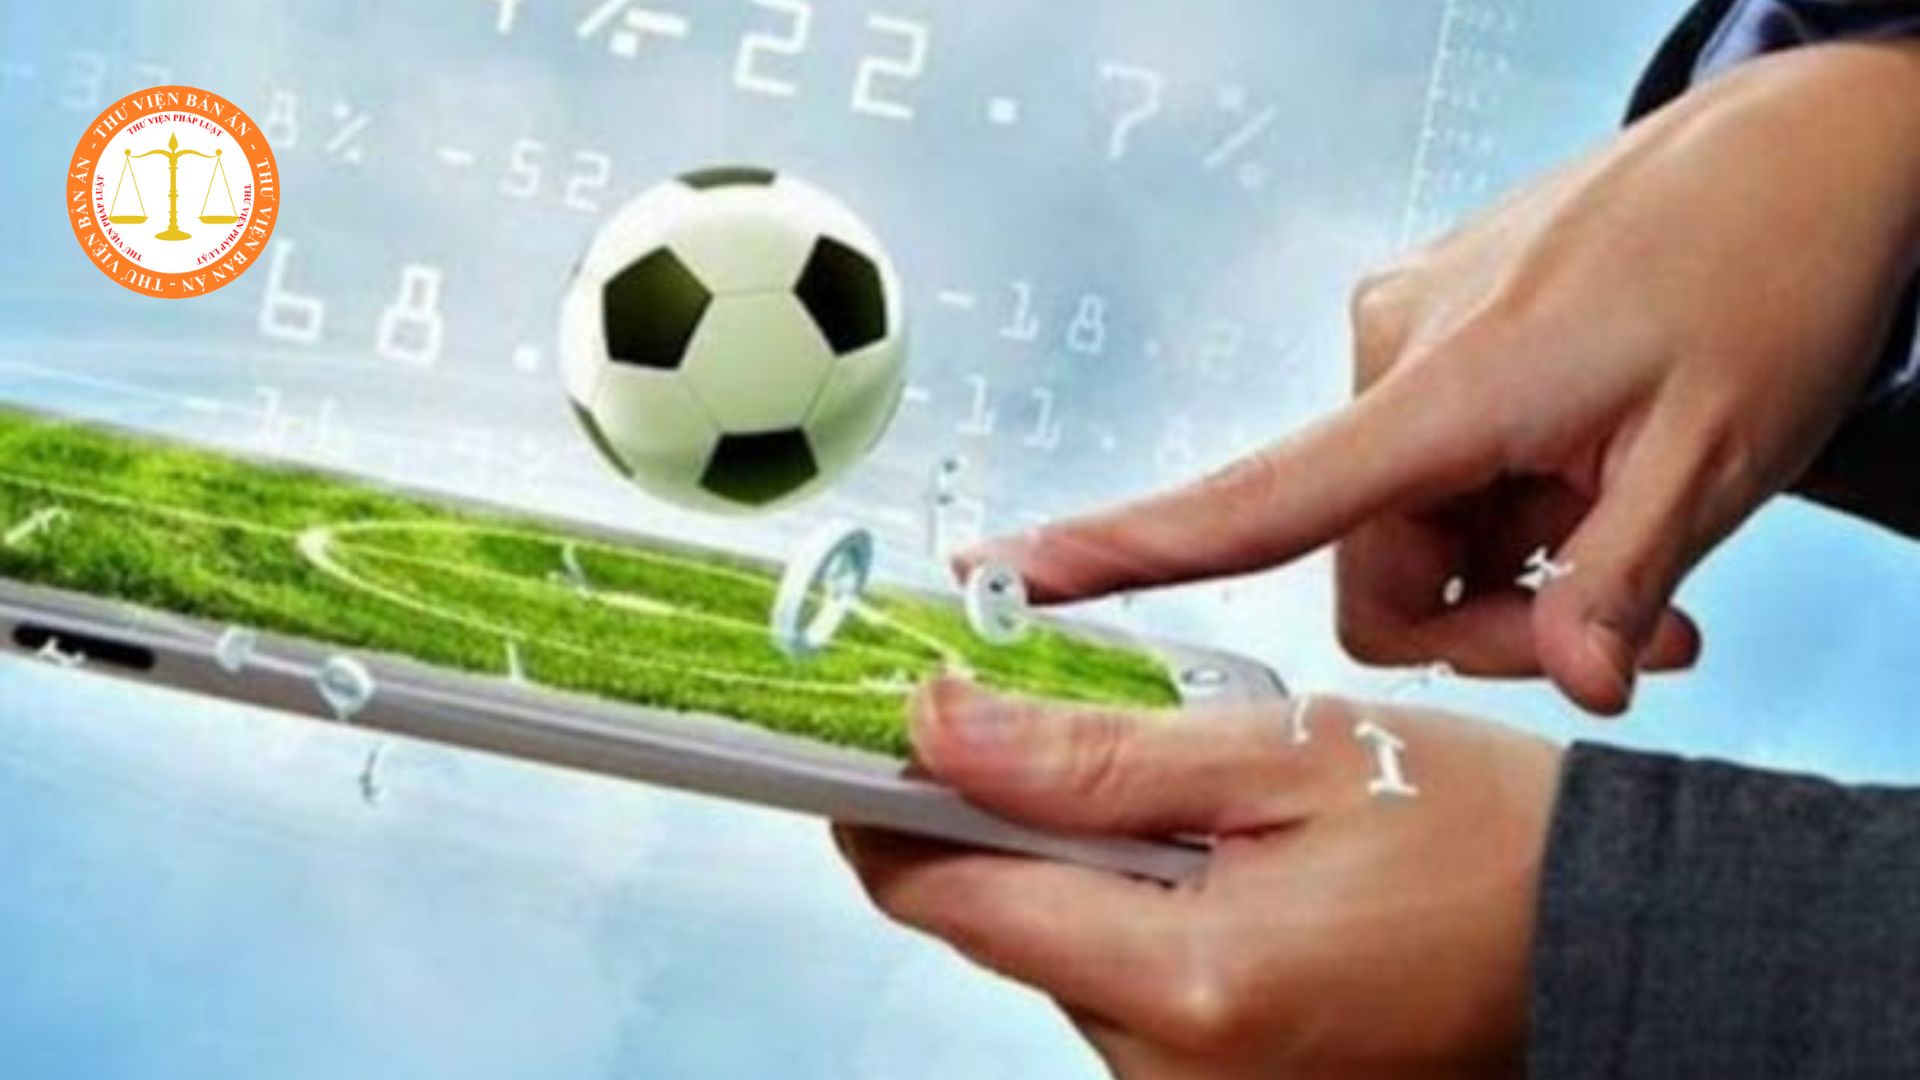 What are the types of betting? How to place a bet on international soccer legally in Vietnam?